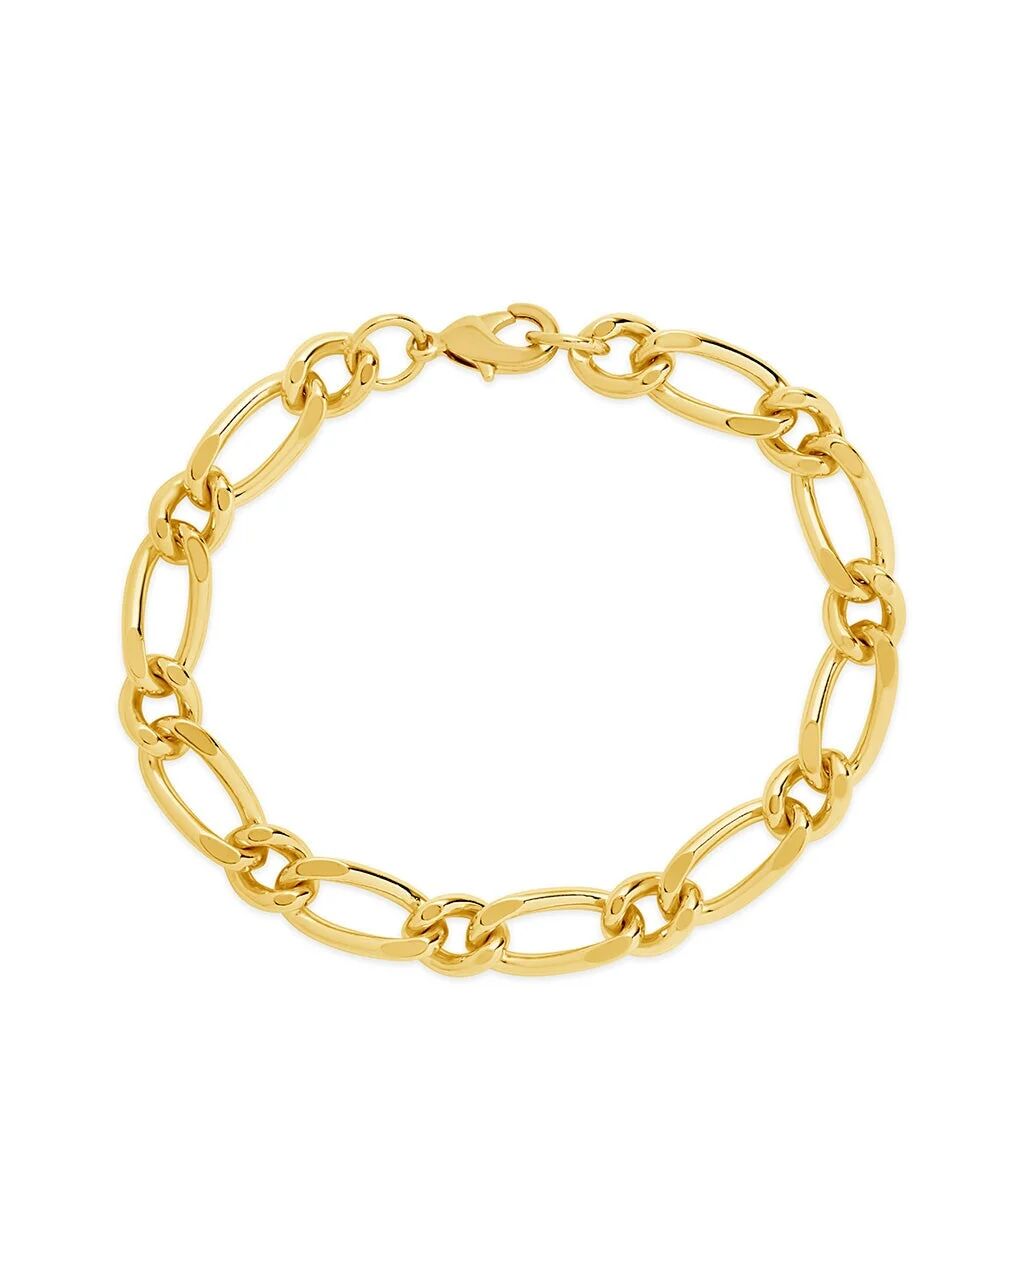 Men's Jewelry | Chunky Chain Link Bracelet | Sterling Forever